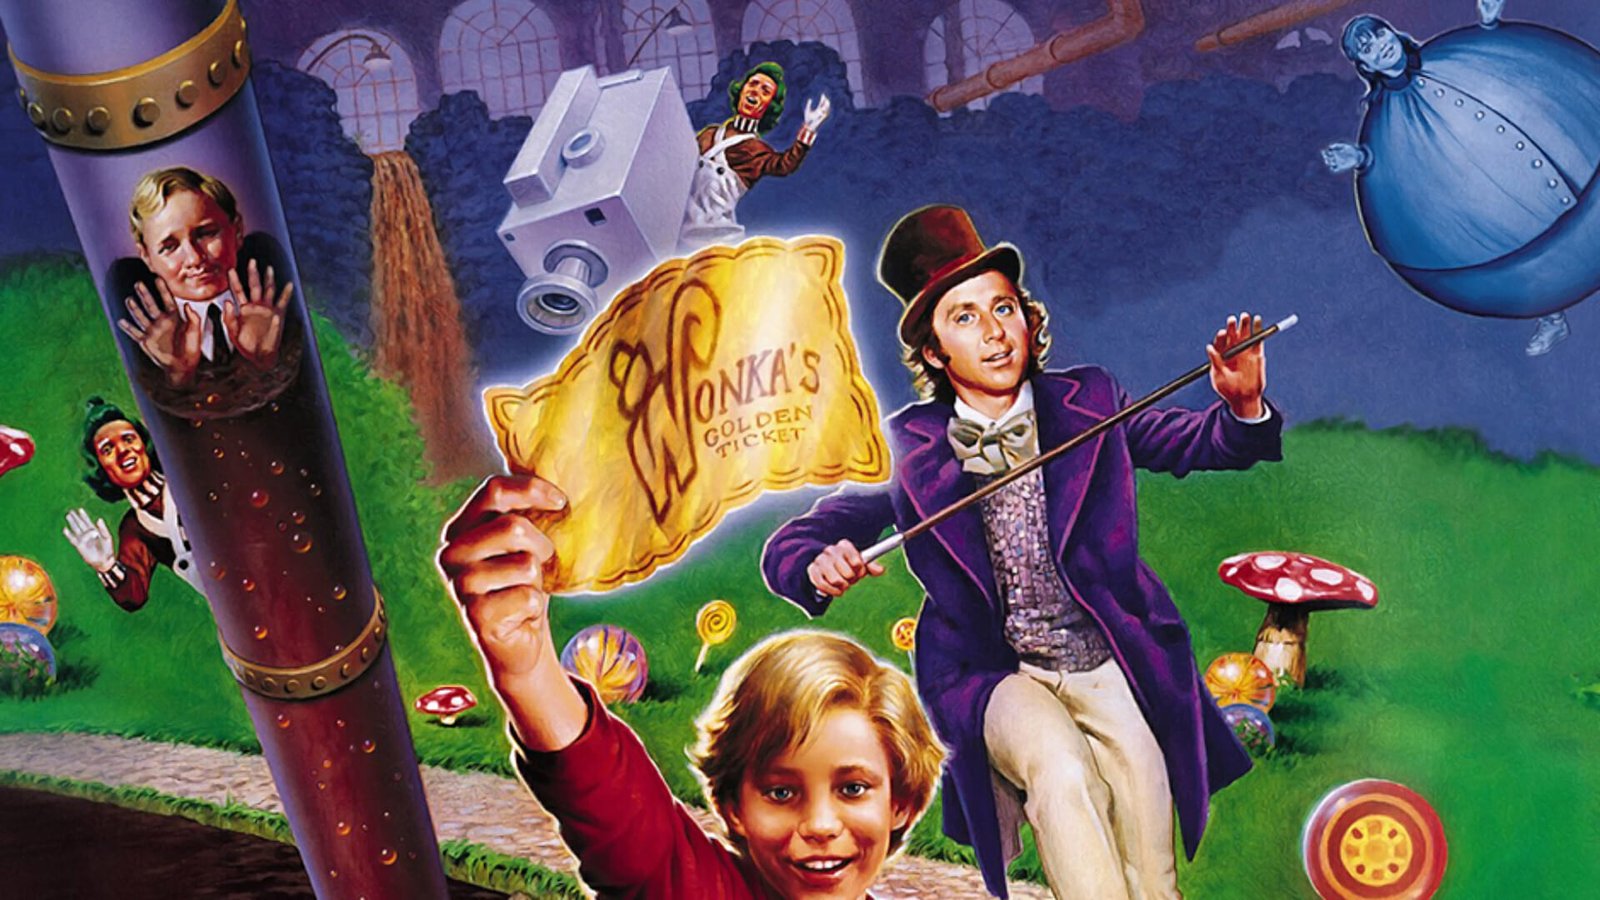 Classic movies on Netflix: Willy Wonka & the Chocolate Factory